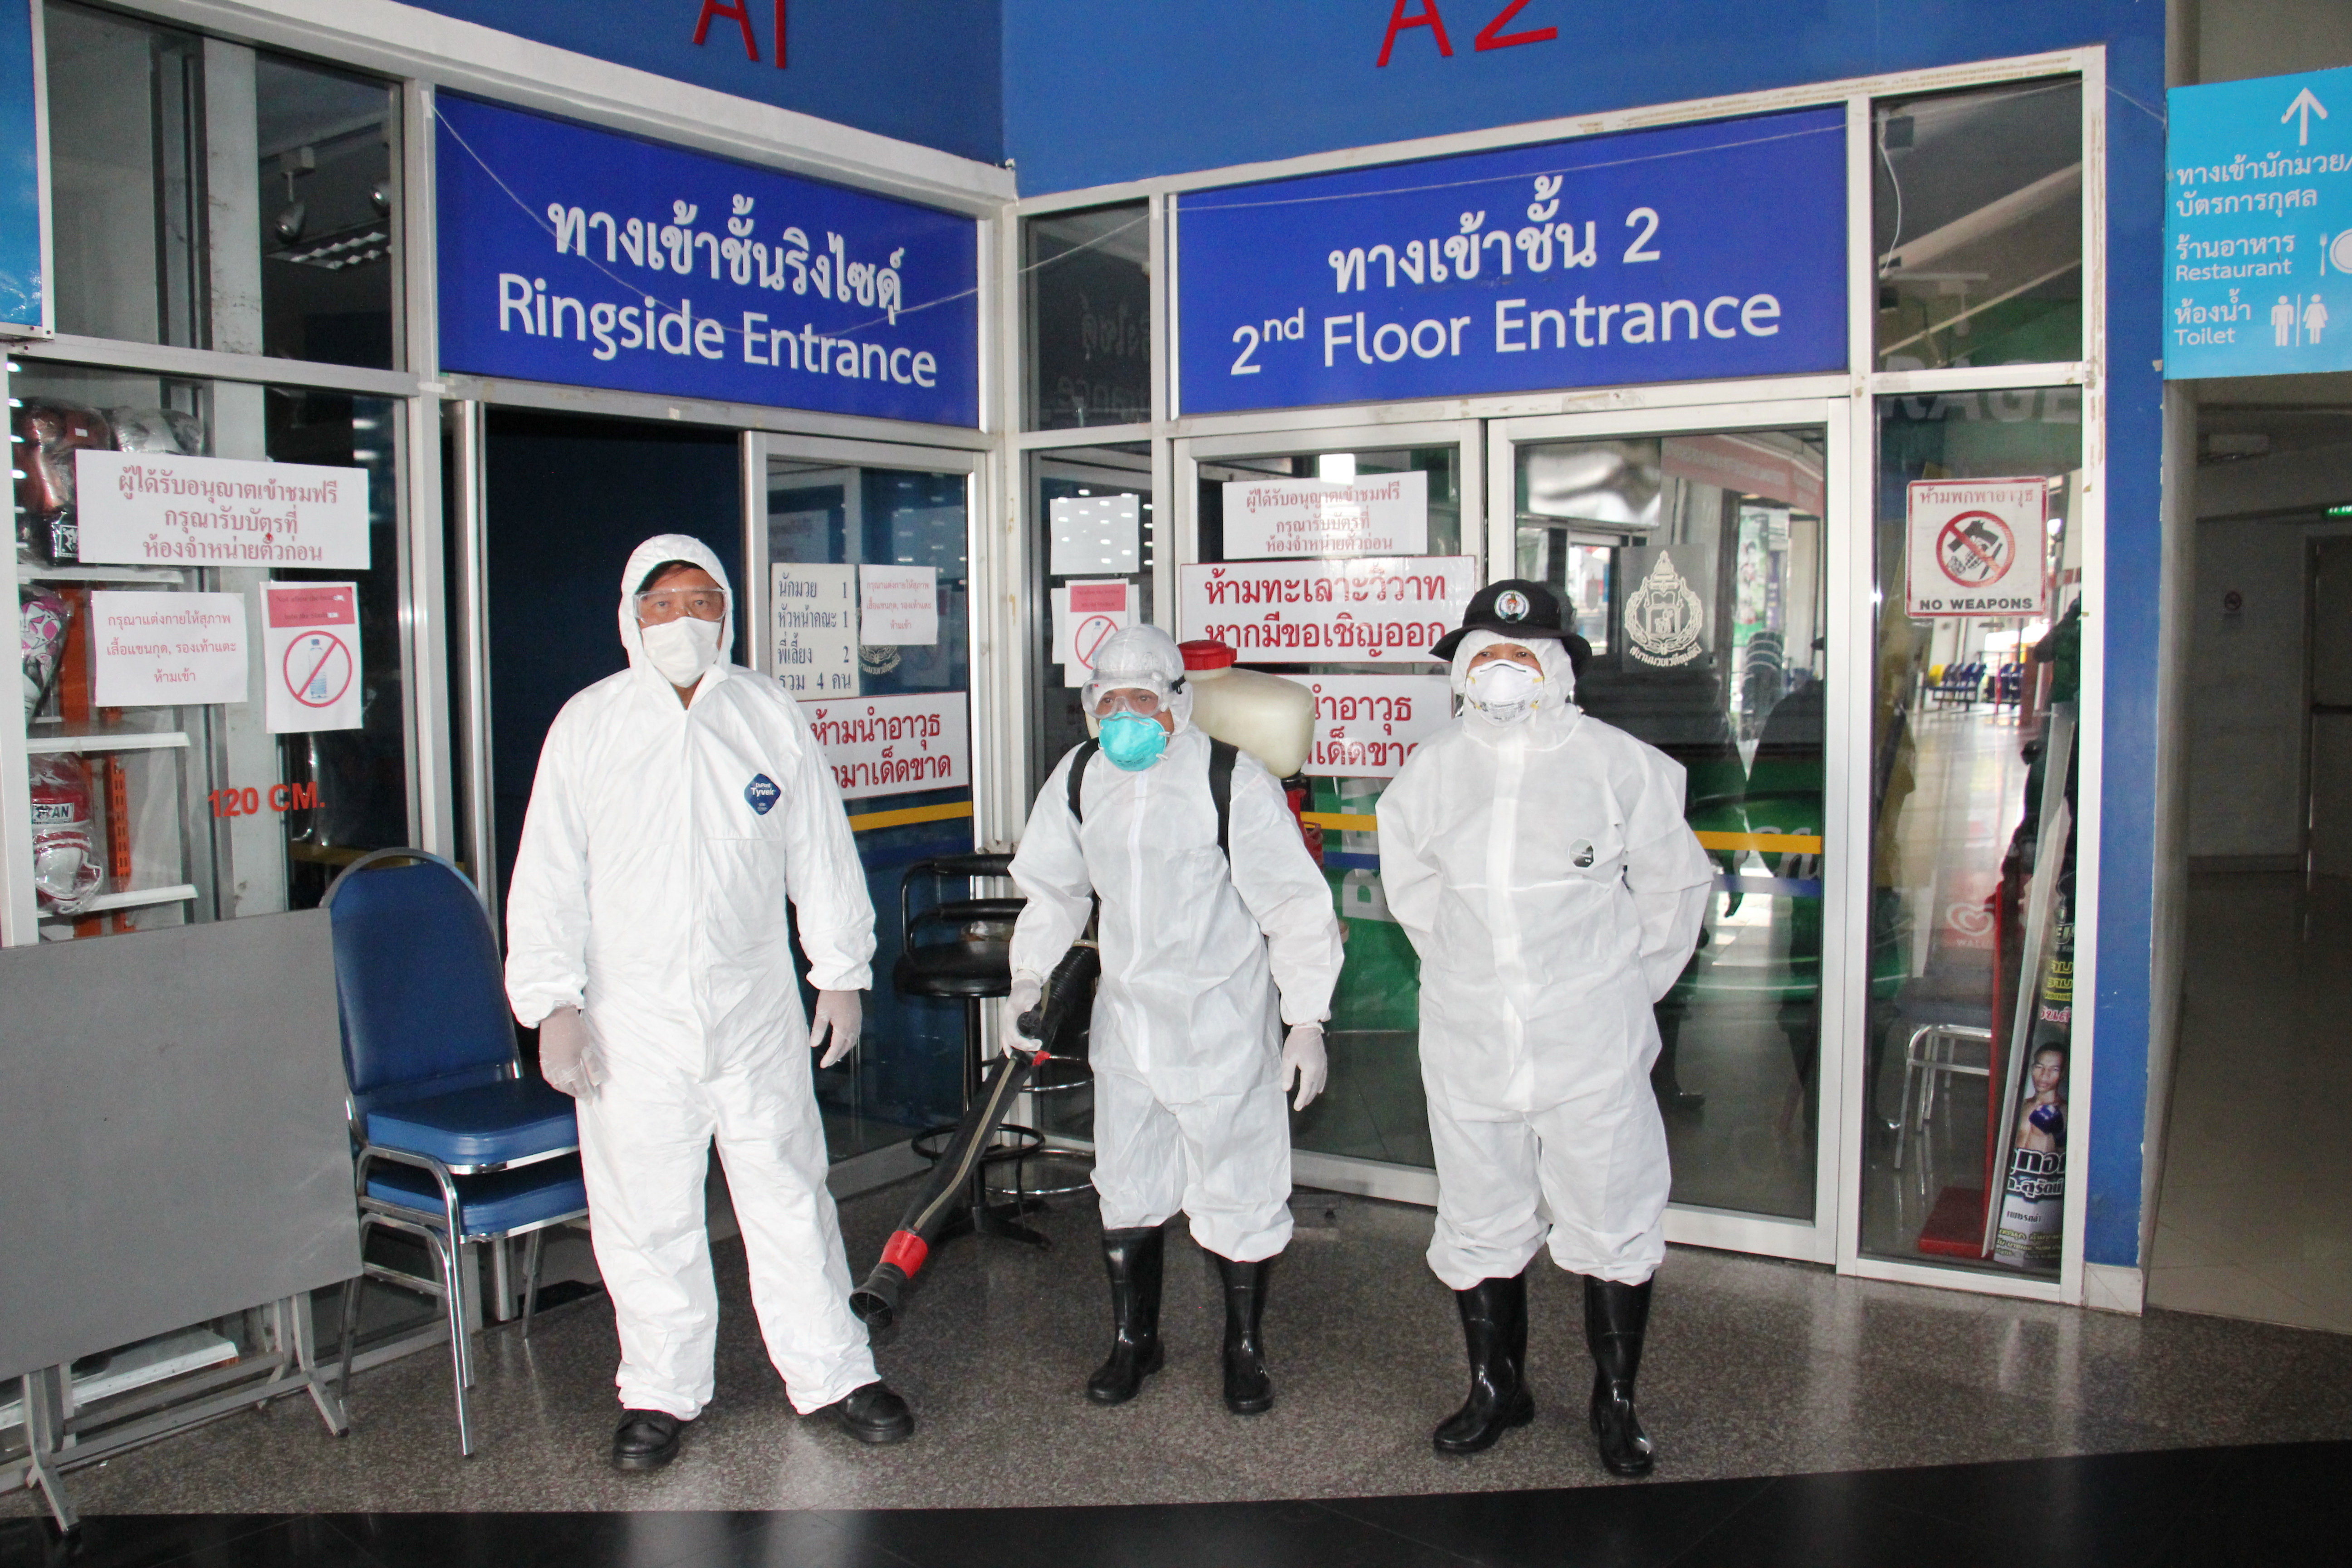 The staff to clean the Pomprab District, Bangkok, by spraying disinfectants inside and outside the Lumpinee Boxing Stadium  due to the widespread of  Coronavirus (2019-nCoV)